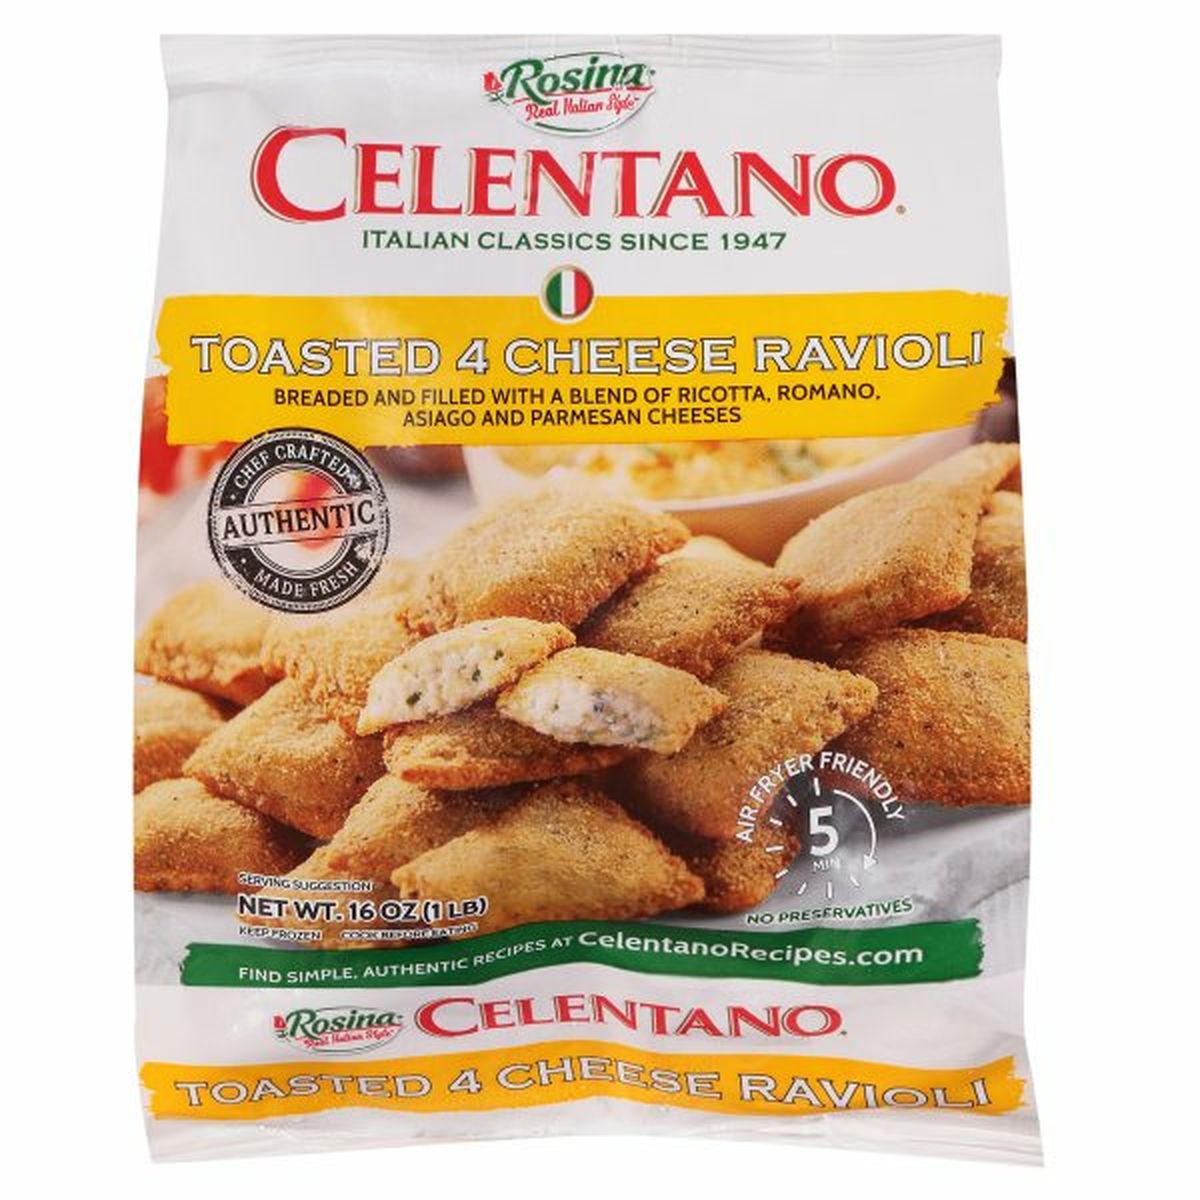 Calories in Celentano Ravioli, 4 Cheese, Toasted